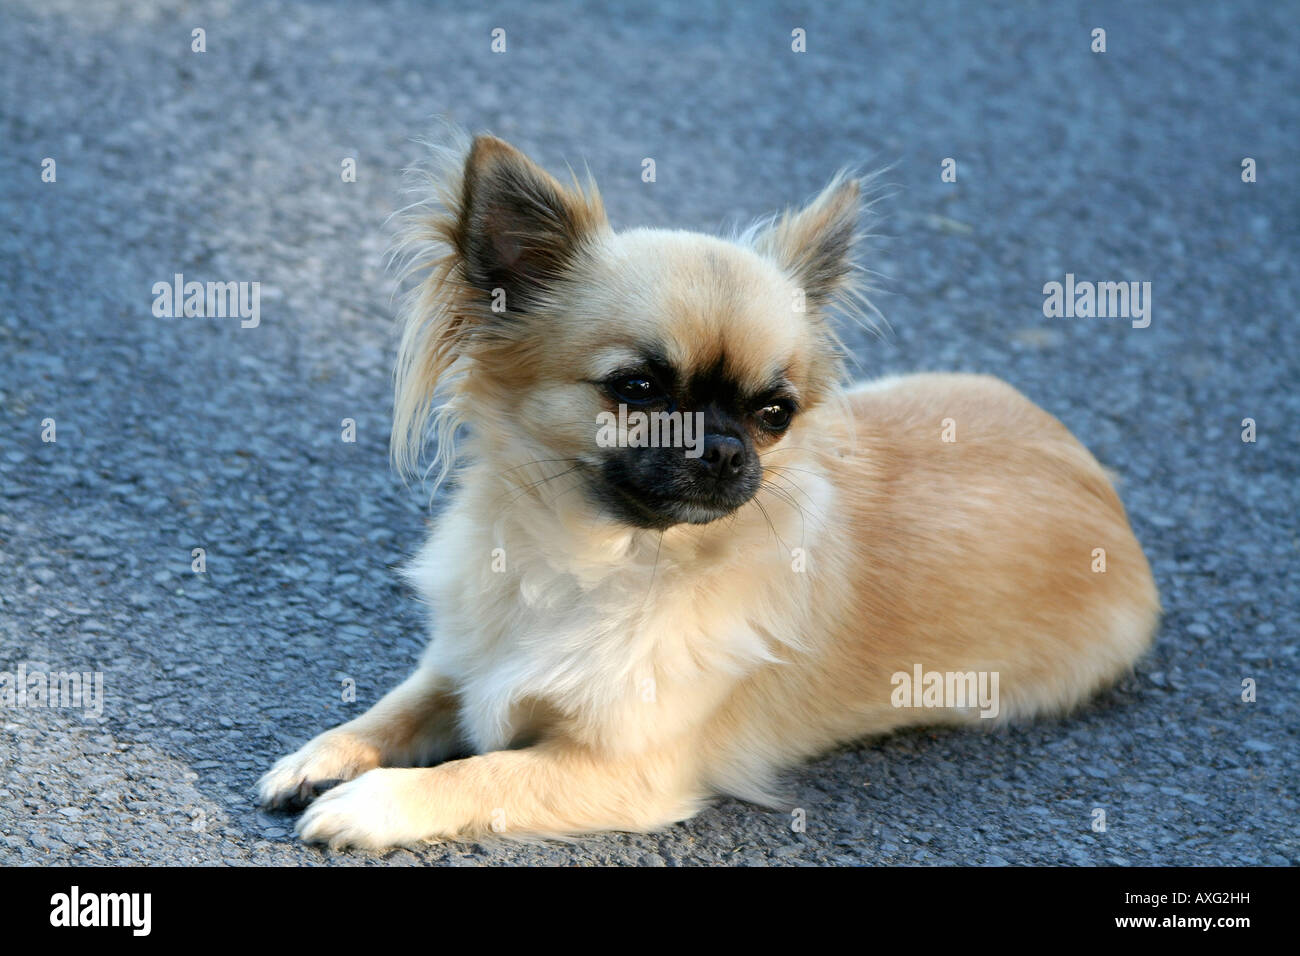 Small Chihuahua toy dog with pretty face and dark eyes with soft long coat Stock Photo